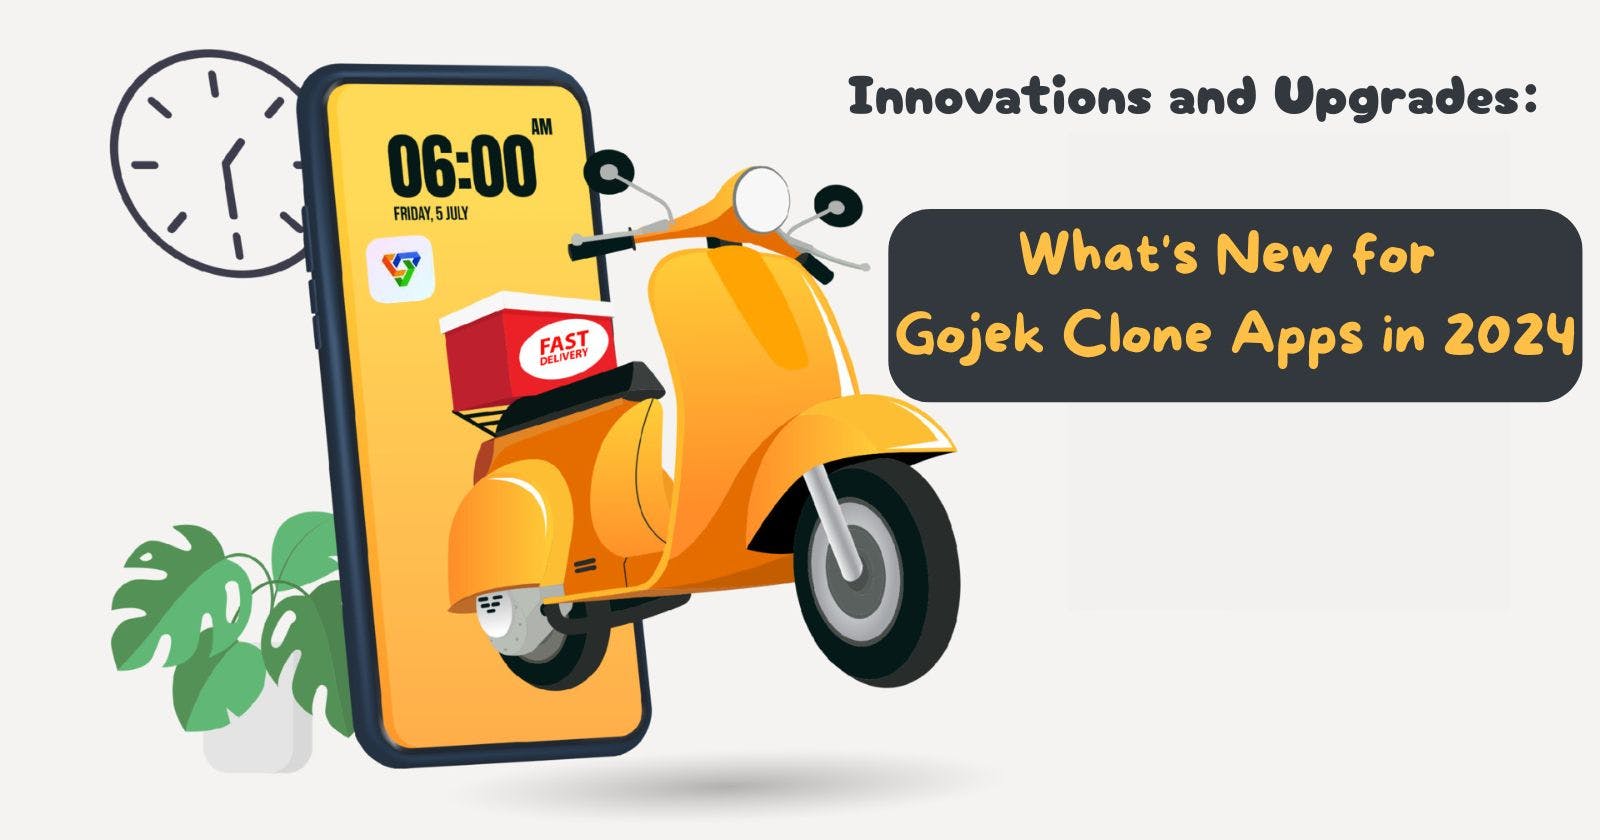 Innovations and Upgrades: What's New for Gojek Clone Apps in 2024